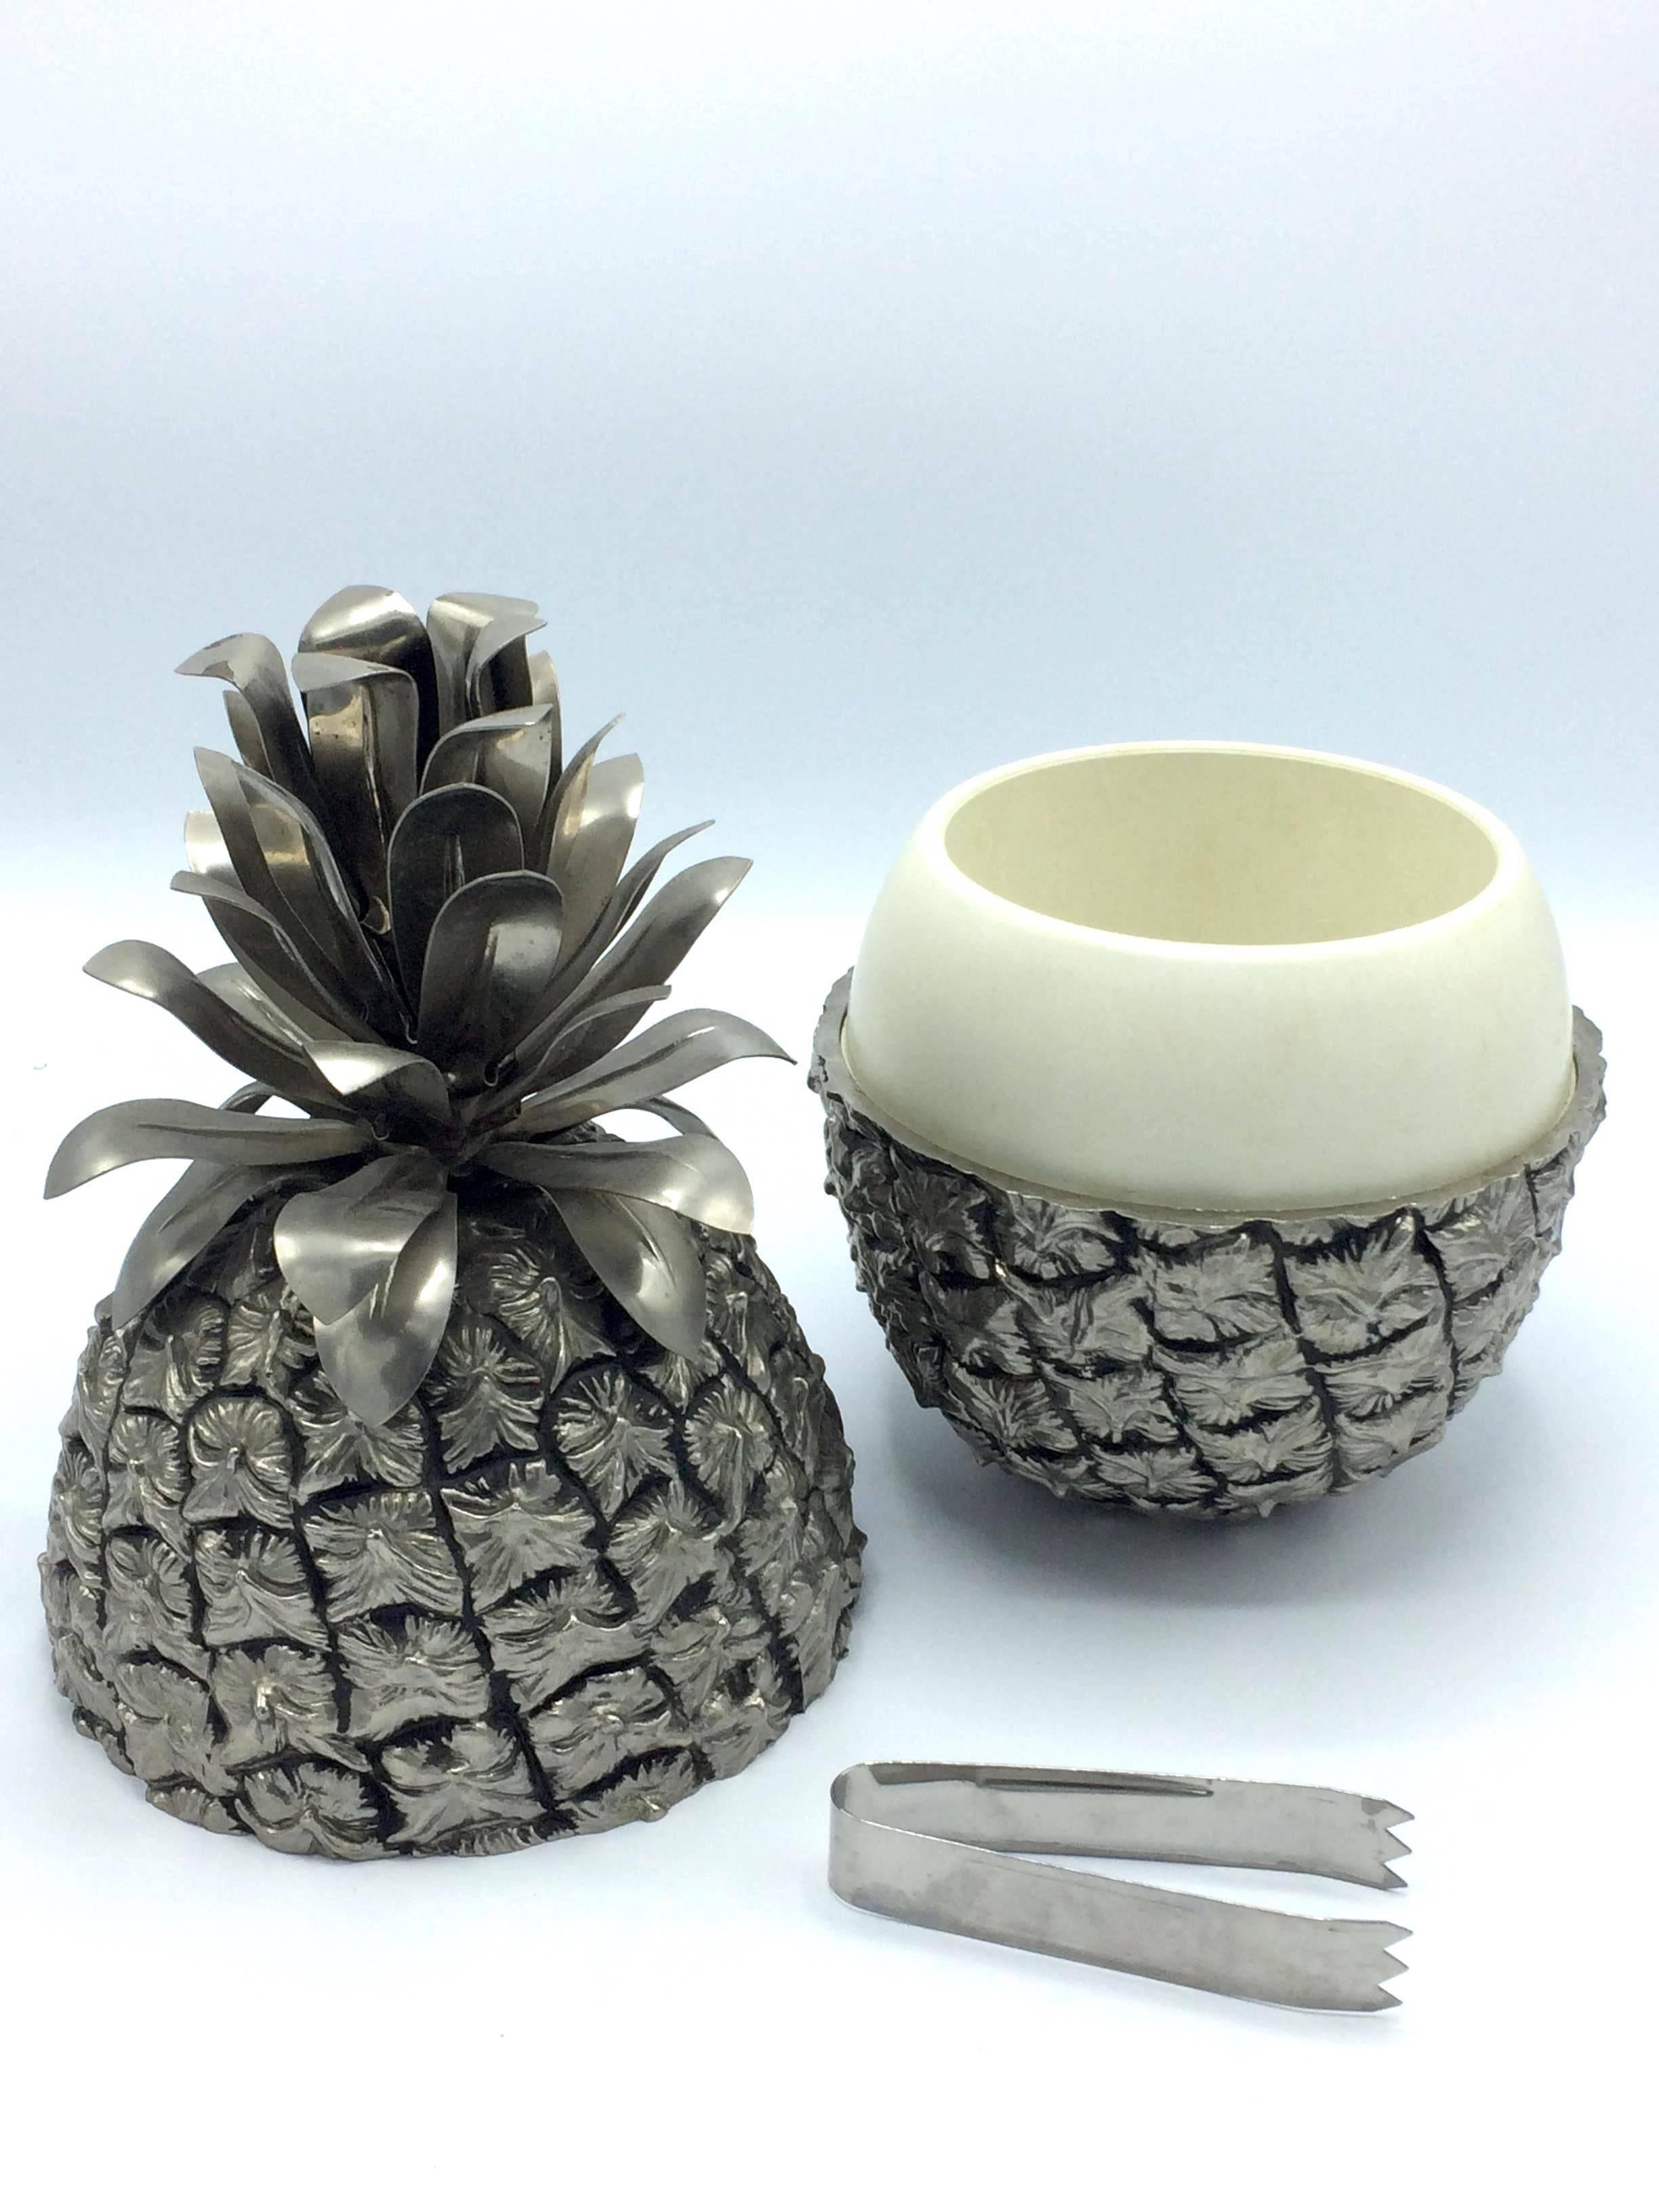 Pineapple Regency Ice Bucket by Turnwald, Switzerland In Good Condition For Sale In Gent, BE